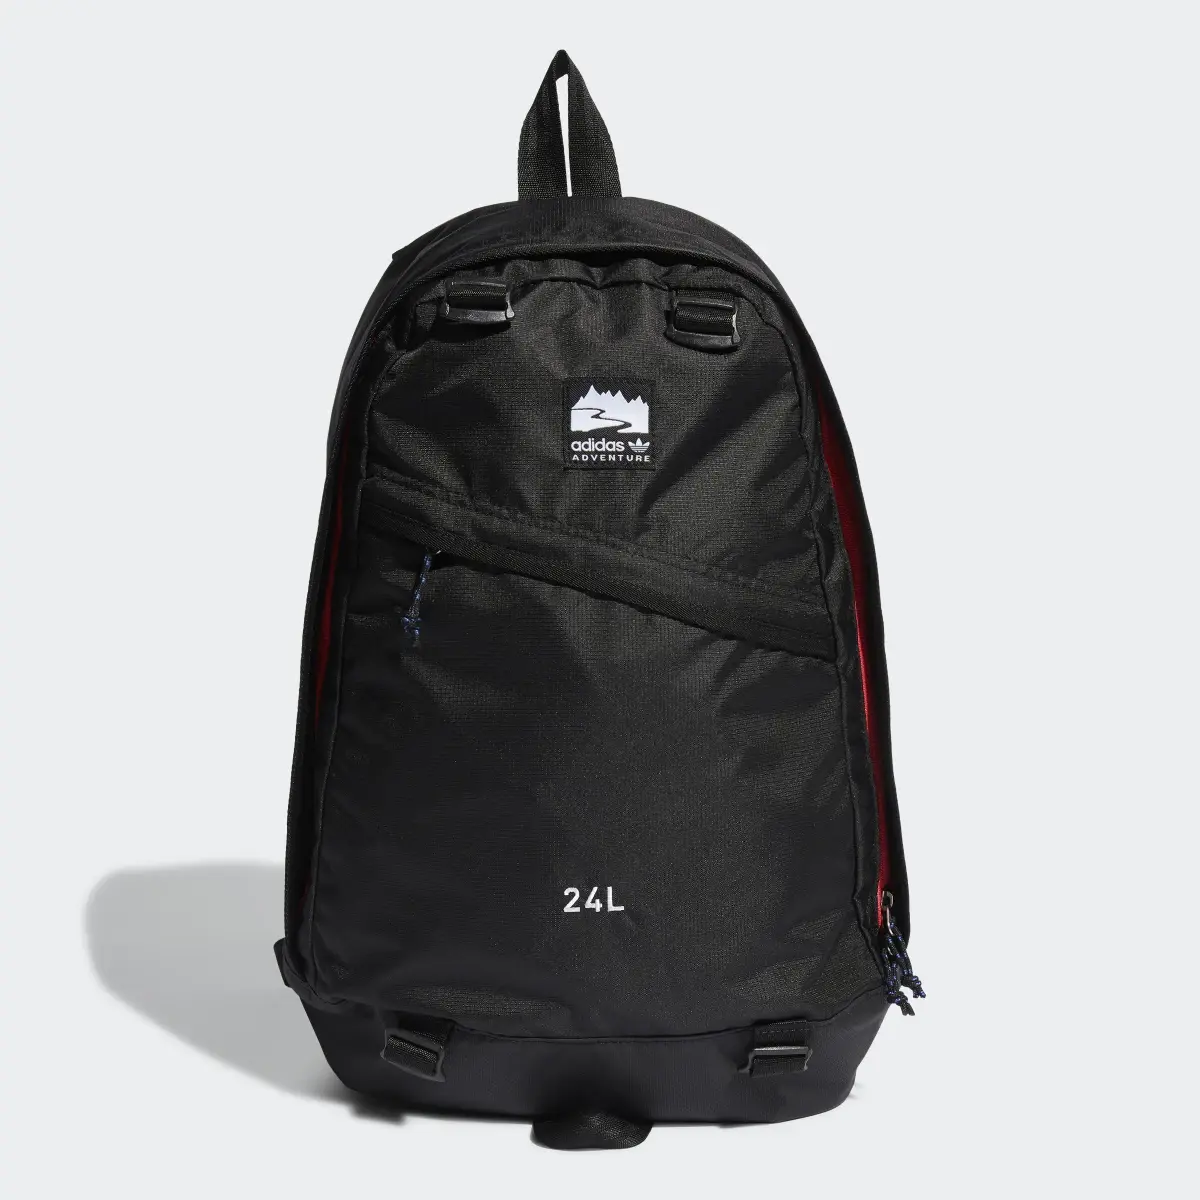 Adidas Adventure Backpack Small. 1